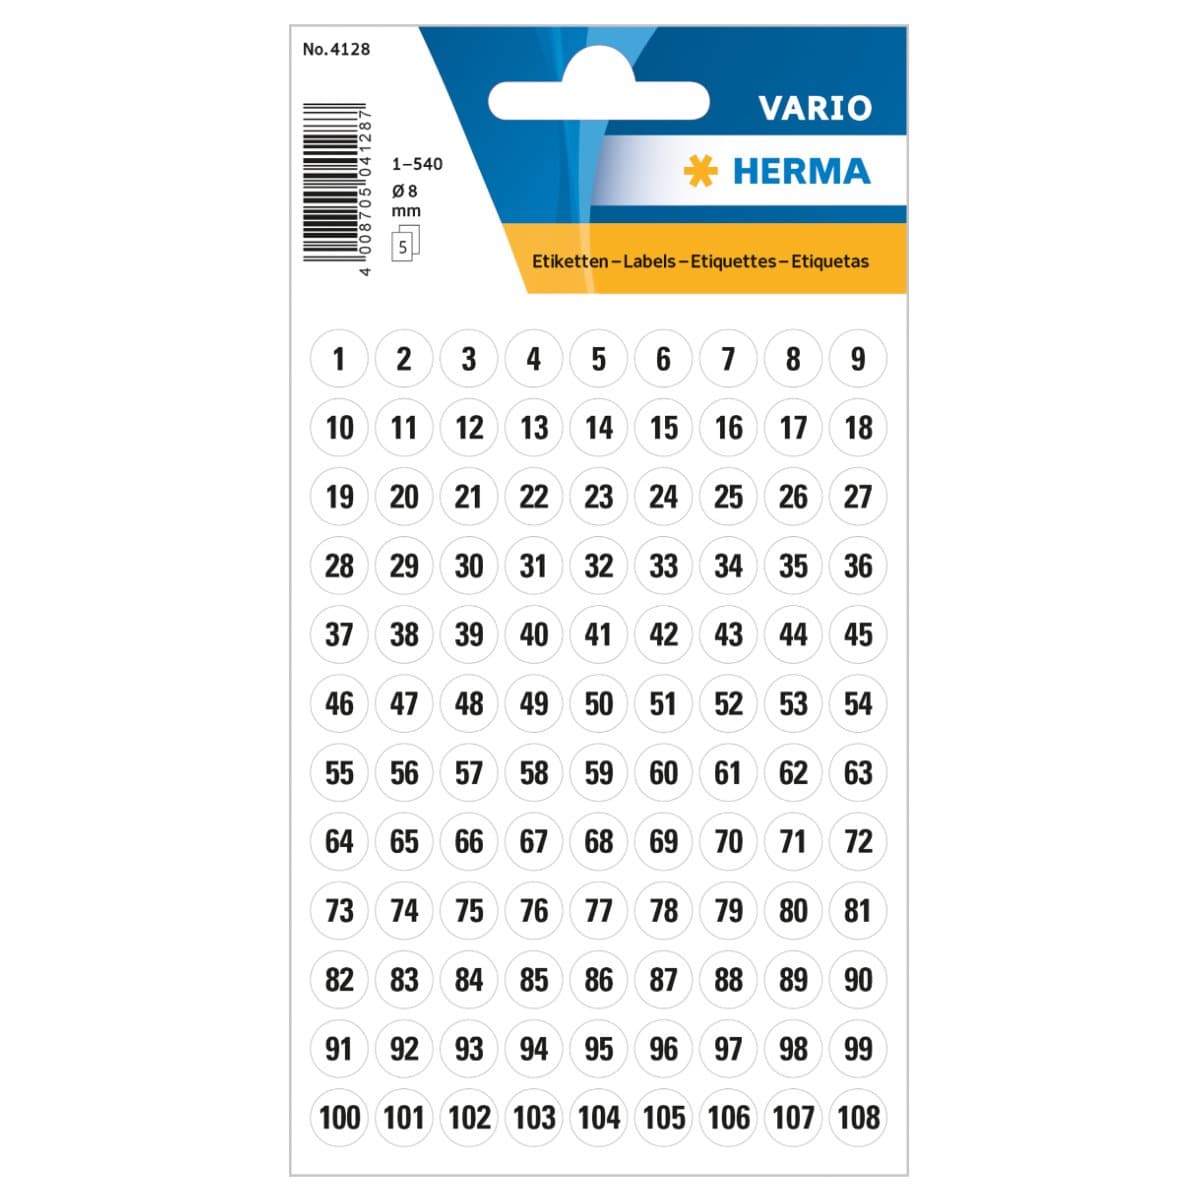 Herma Vario Sticker Dots with Numbers 1-540, 8mm, 1set/pack, Black on White